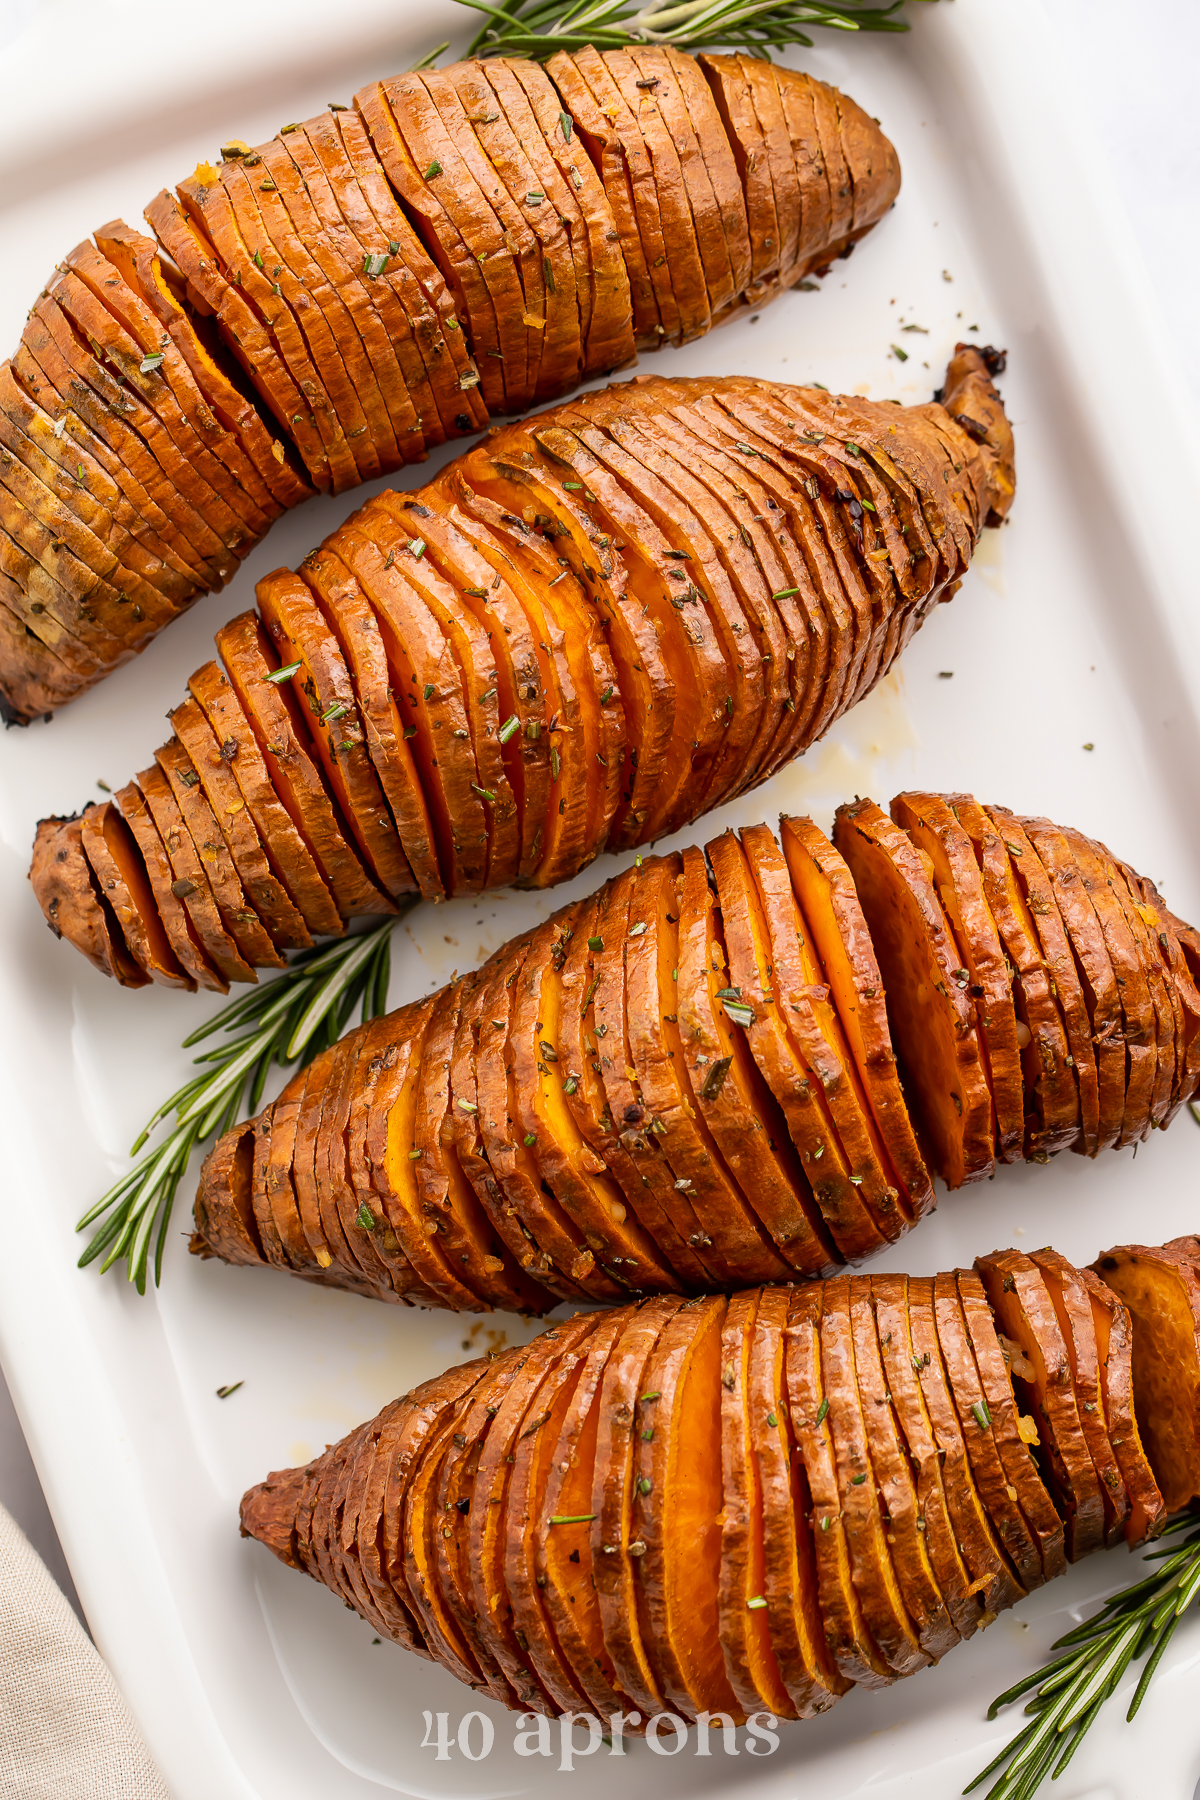 Overhead view of 4 hasselback sweet potatoes placed diagonally on a white rectangular serving tray.